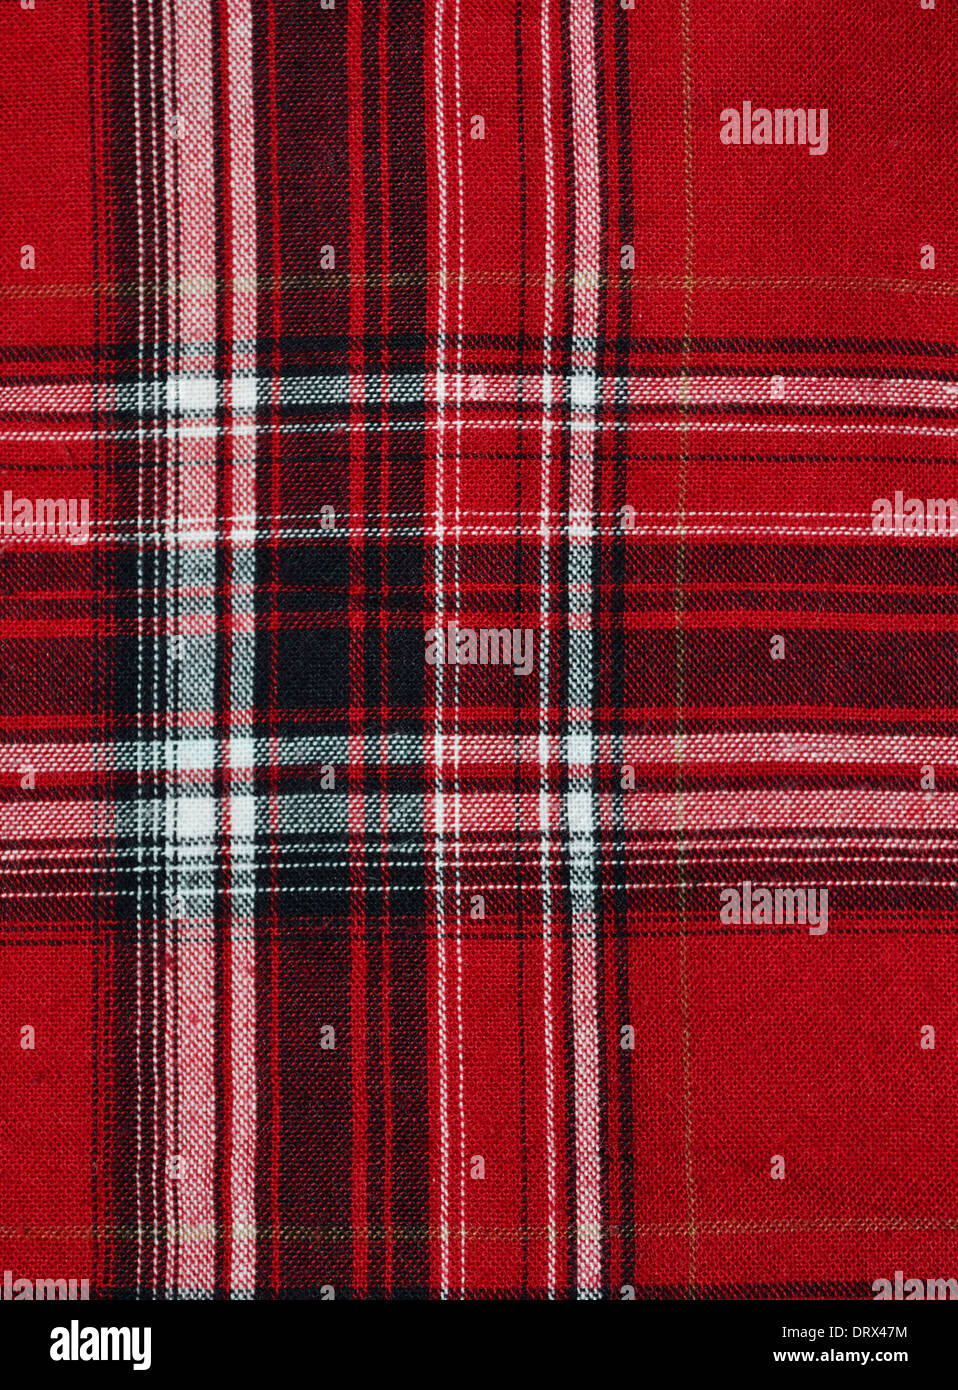 Texture of red-black checkered fabric pattern background Stock Photo